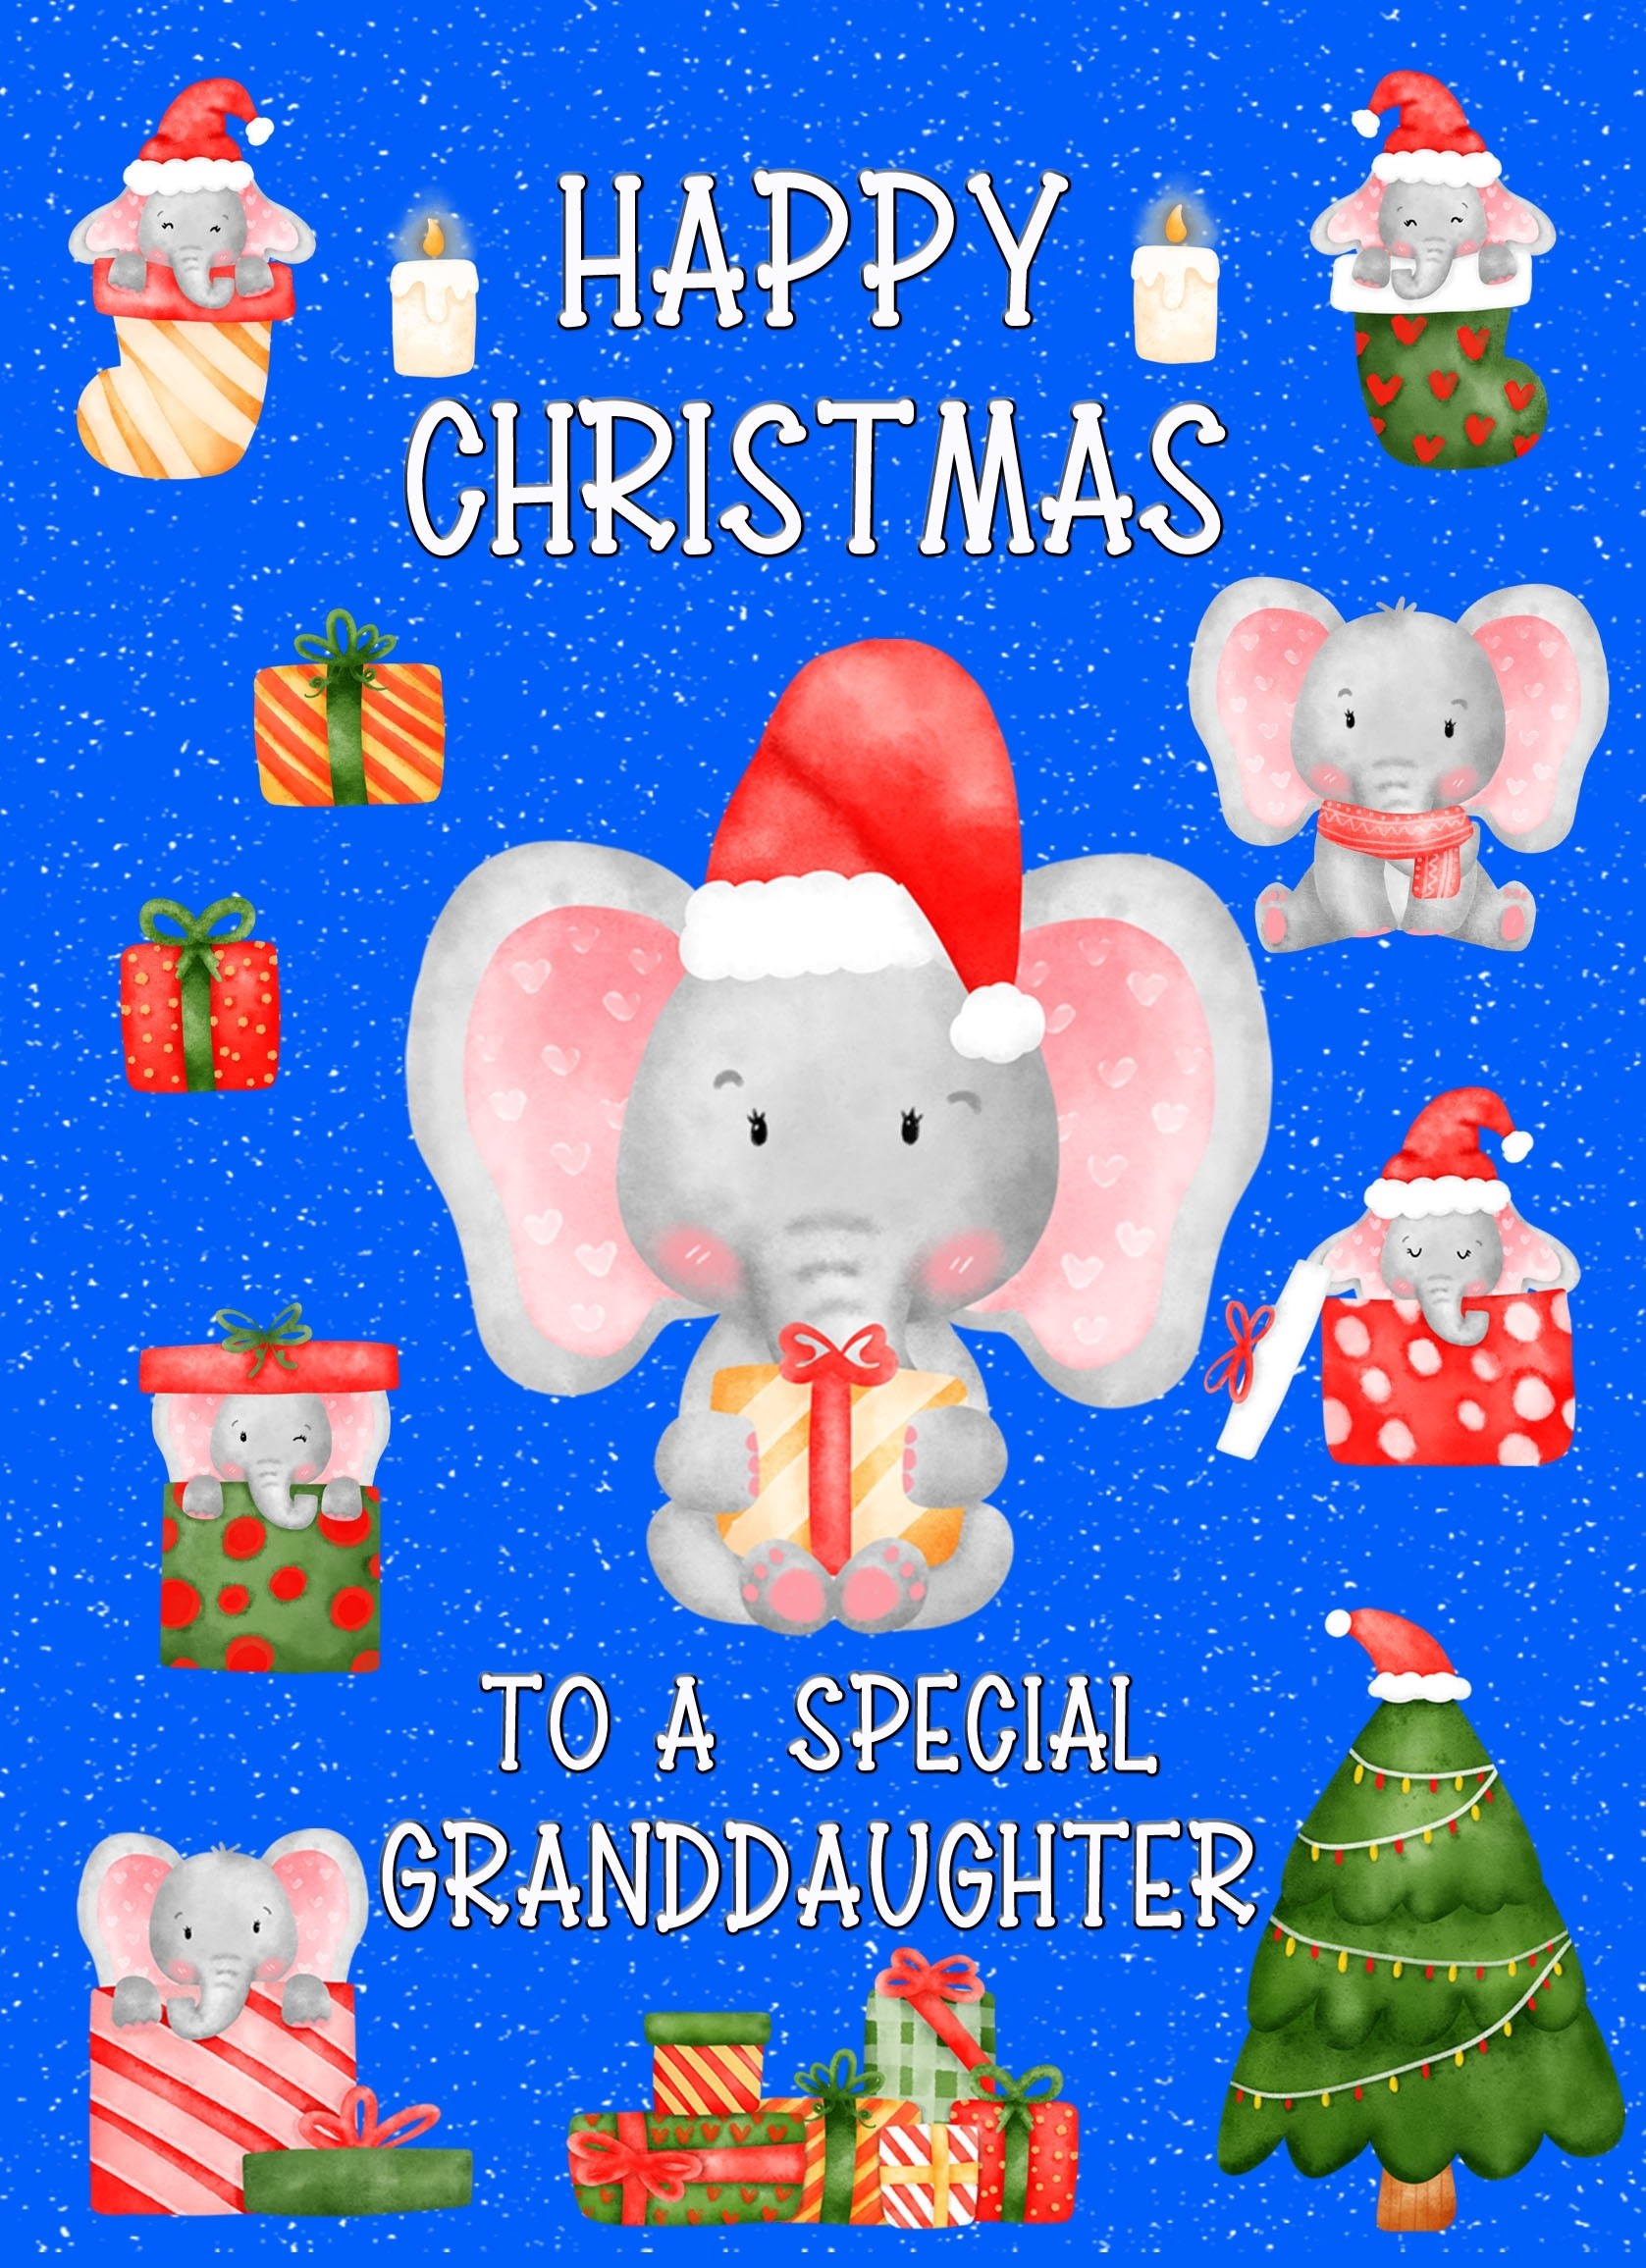 Christmas Card For Special Granddaughter (Blue)